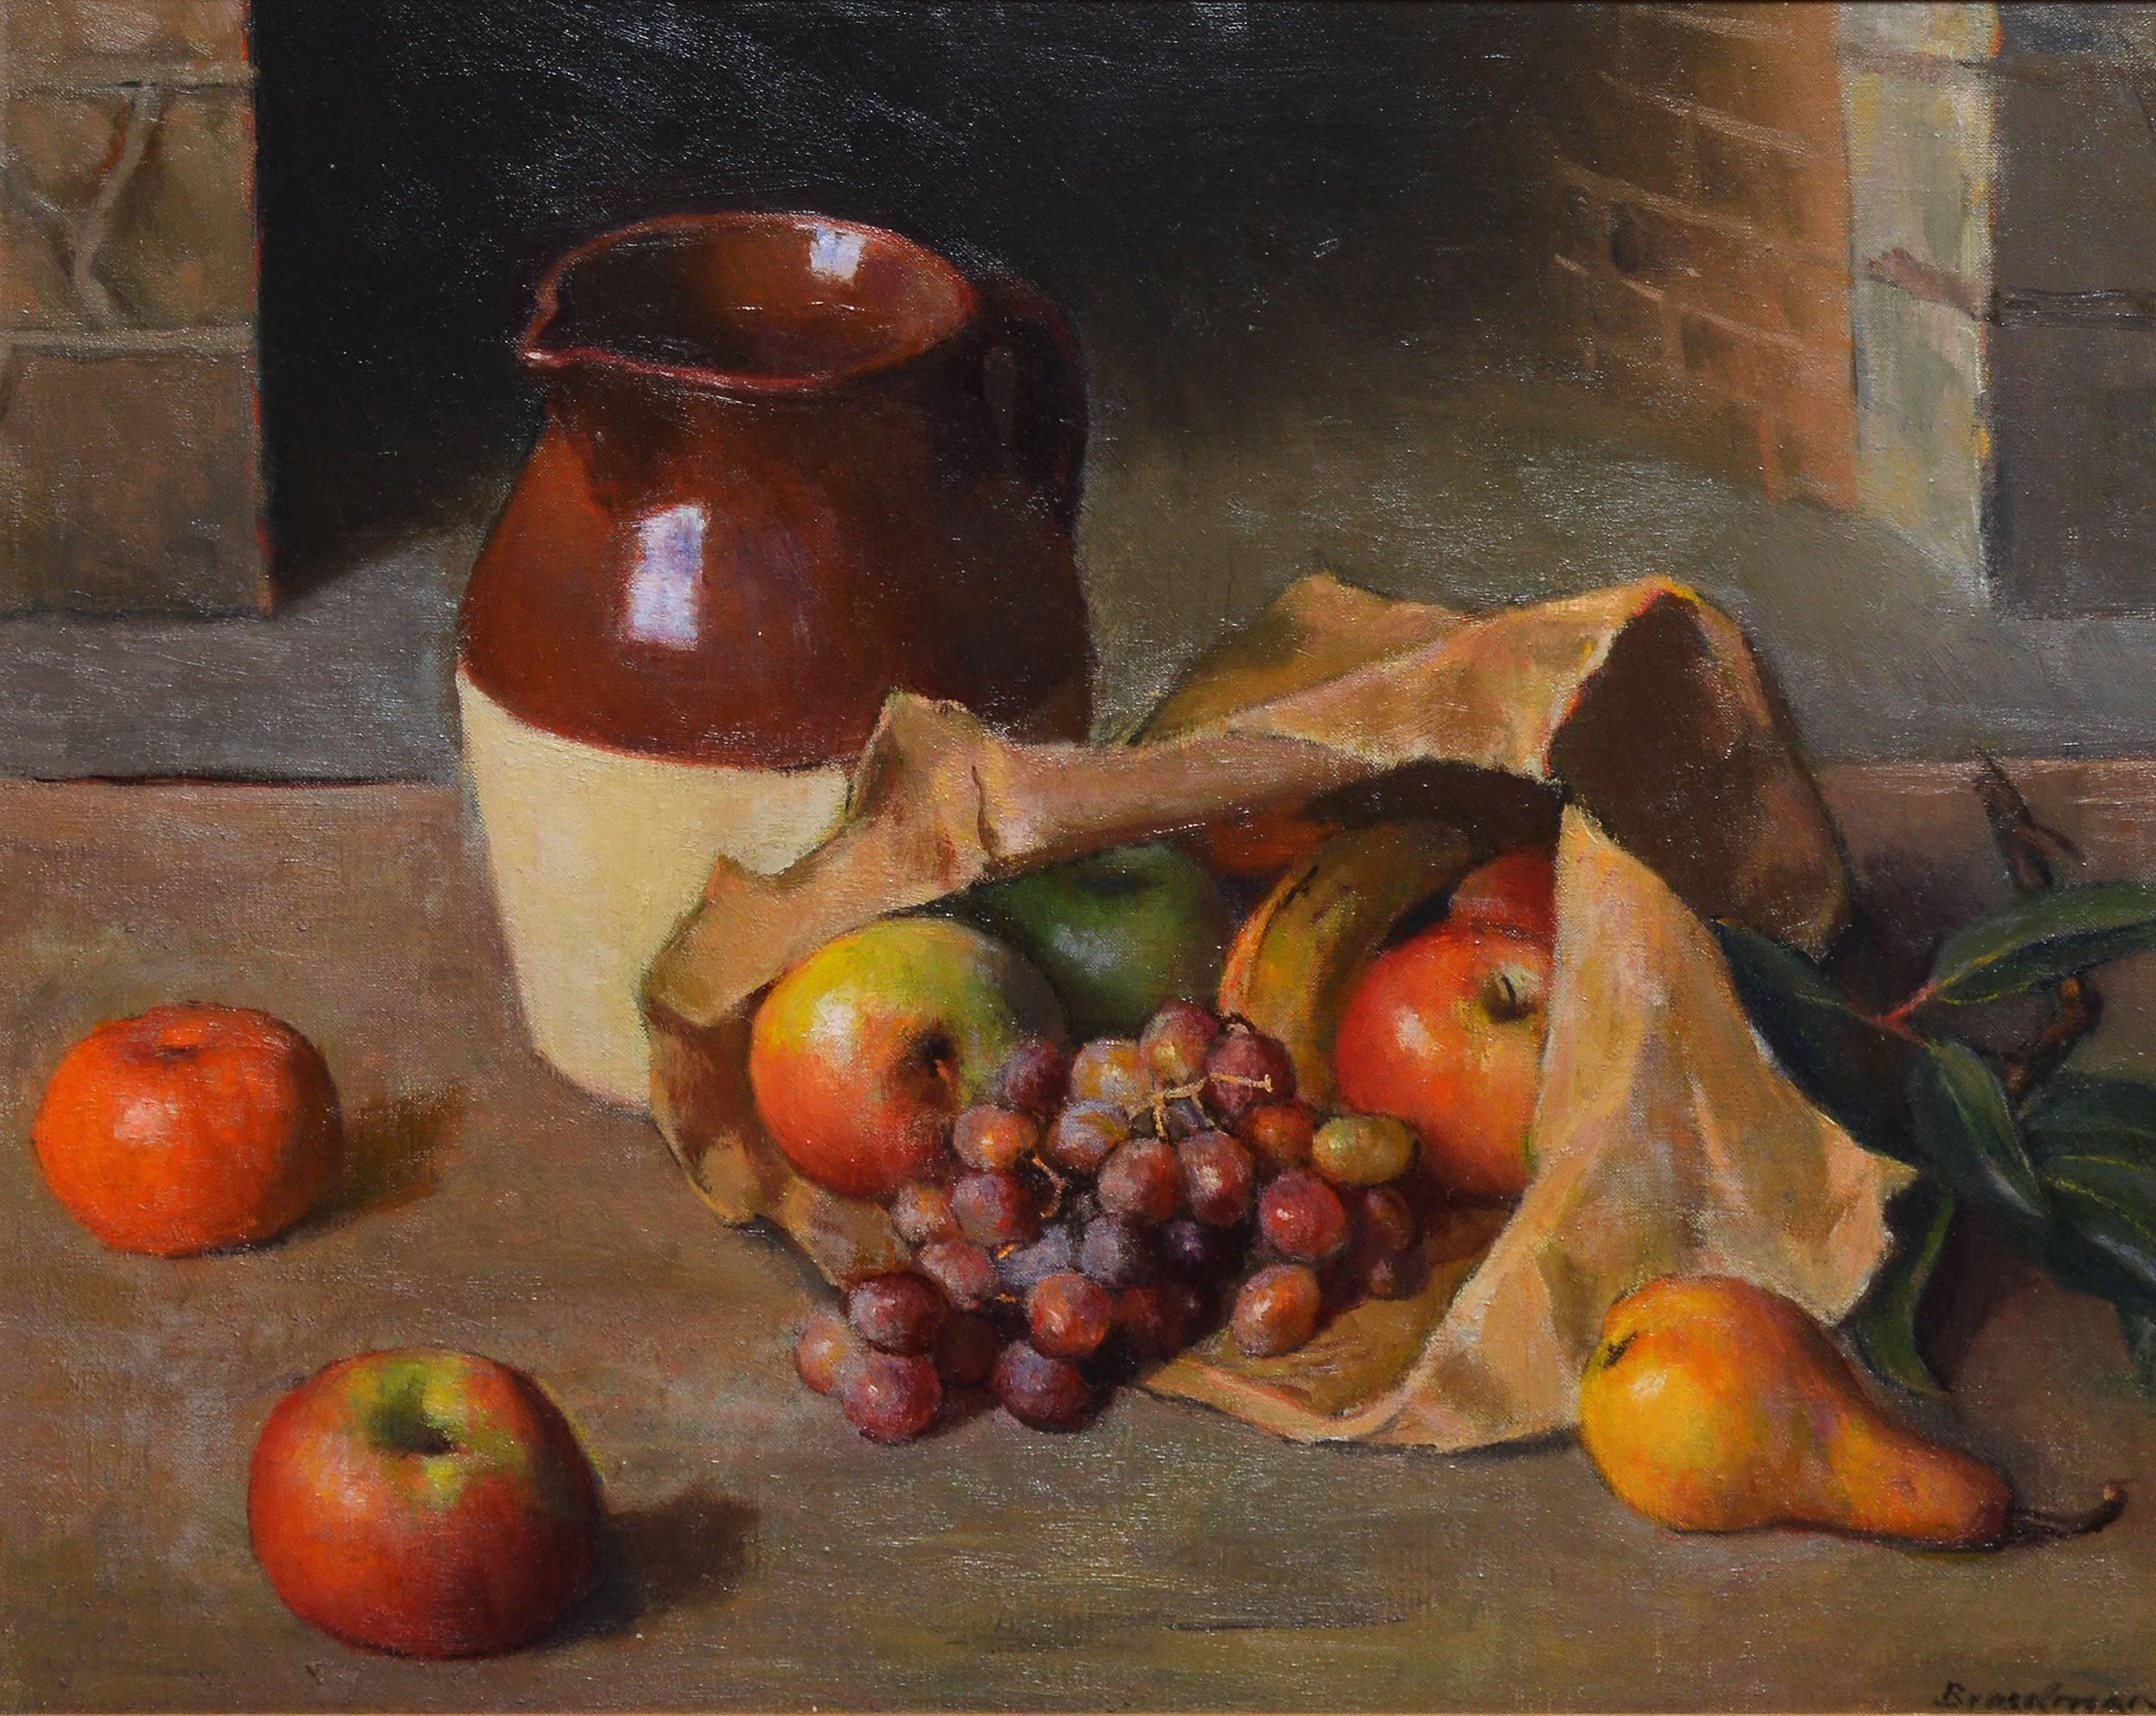 Realist fruit still life painting by Robert Brackman (1898-1980).  Oil on canvas, circa 1940.  Signed lower right, "Brackman".  Displayed in a giltwood impressionist frame.  Image size, 22"L x 18"H, overall 30"L x 26"H.